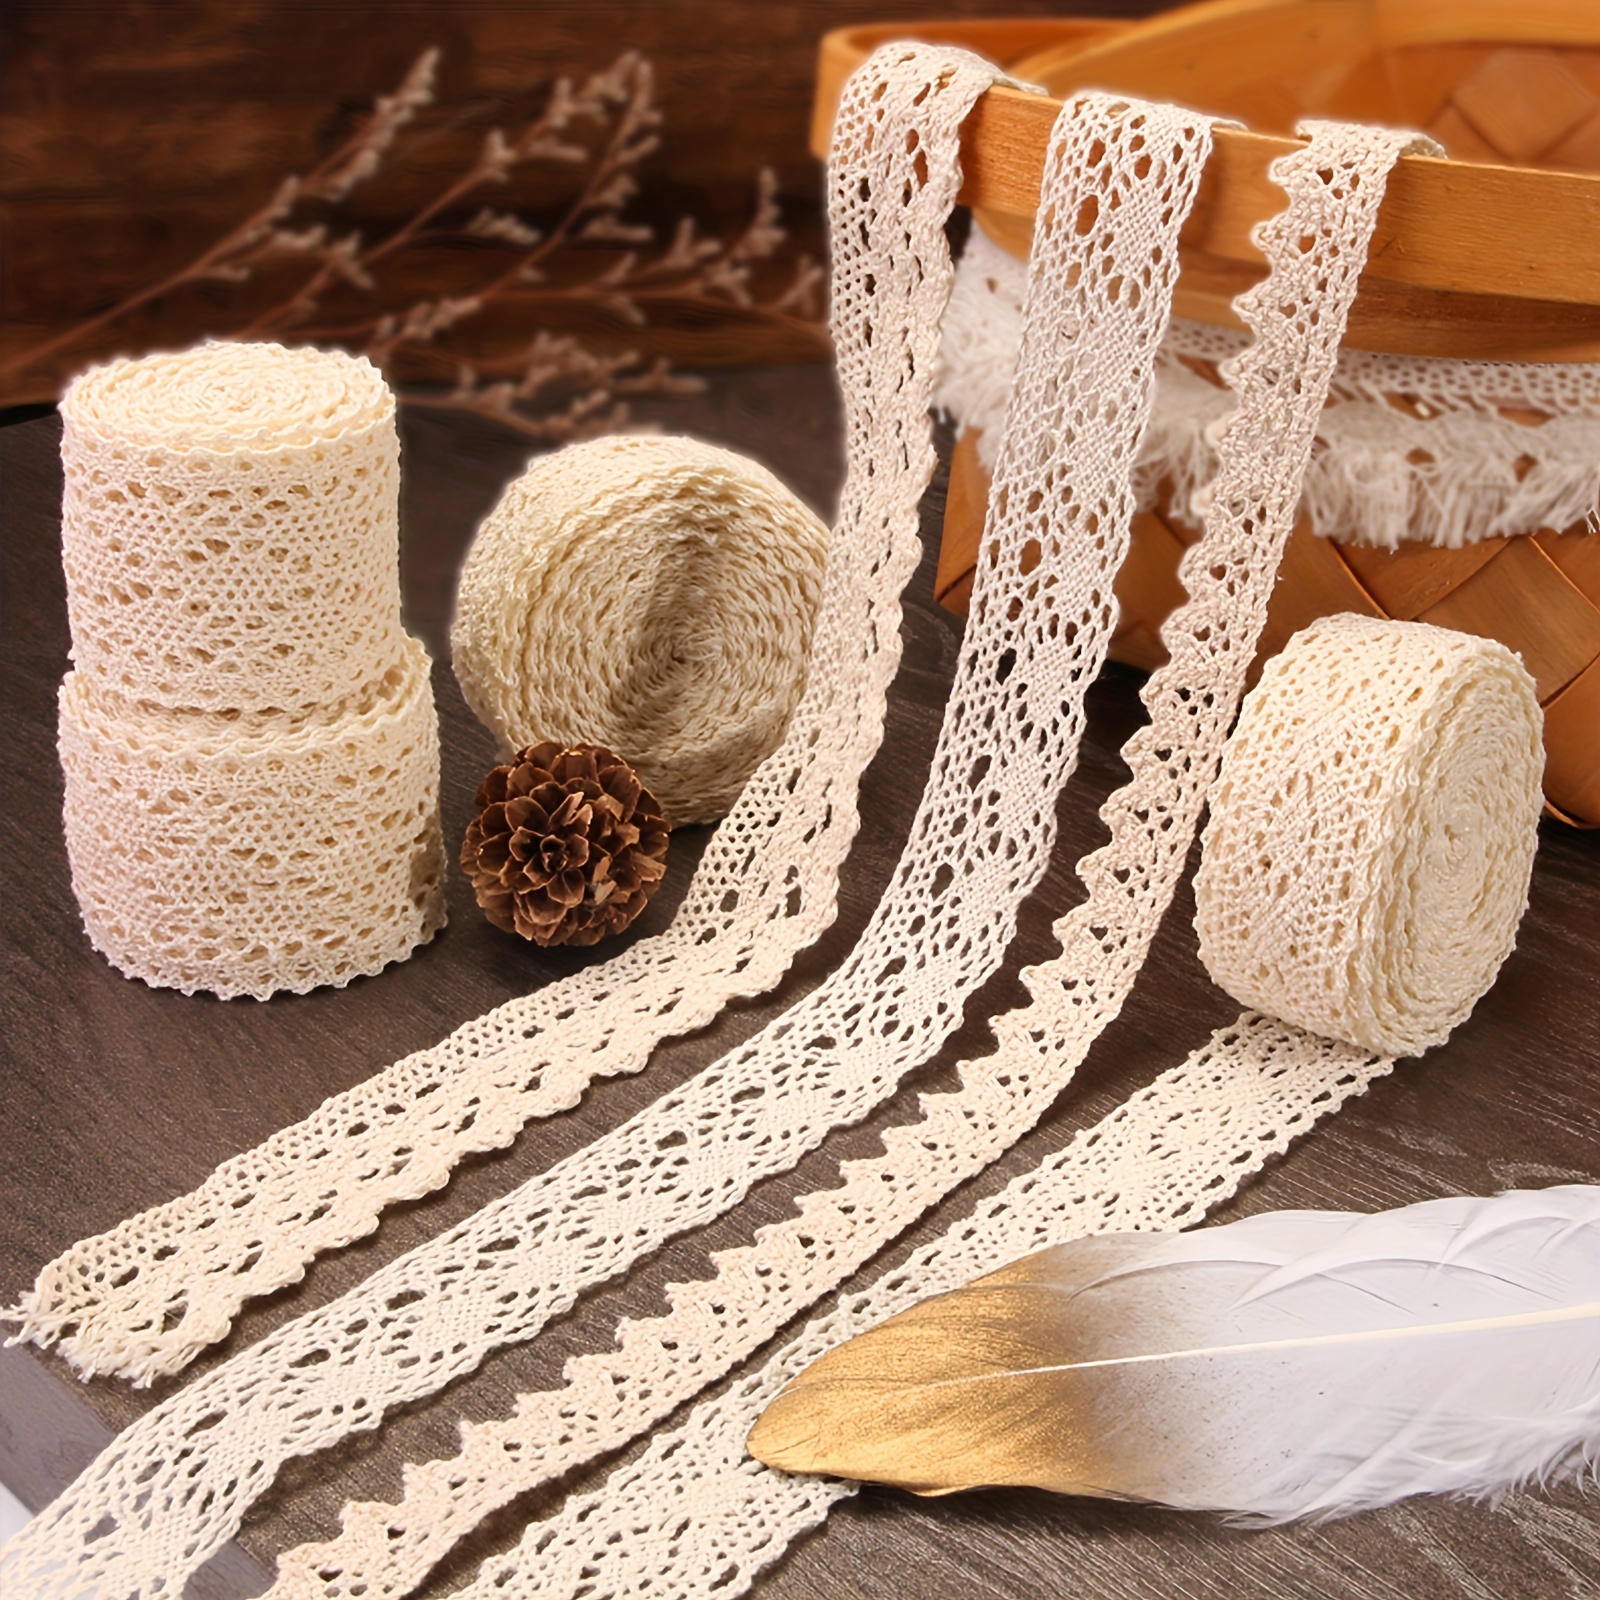  2.4 Inch White Lace Ribbon,Sewing Lace Trim, Elastic Stretchy White  Lace Fabric - 5 Yard,Perfect for Crafting,Sewing Making,Gift Wrapping and  Bridal Wedding Decorations